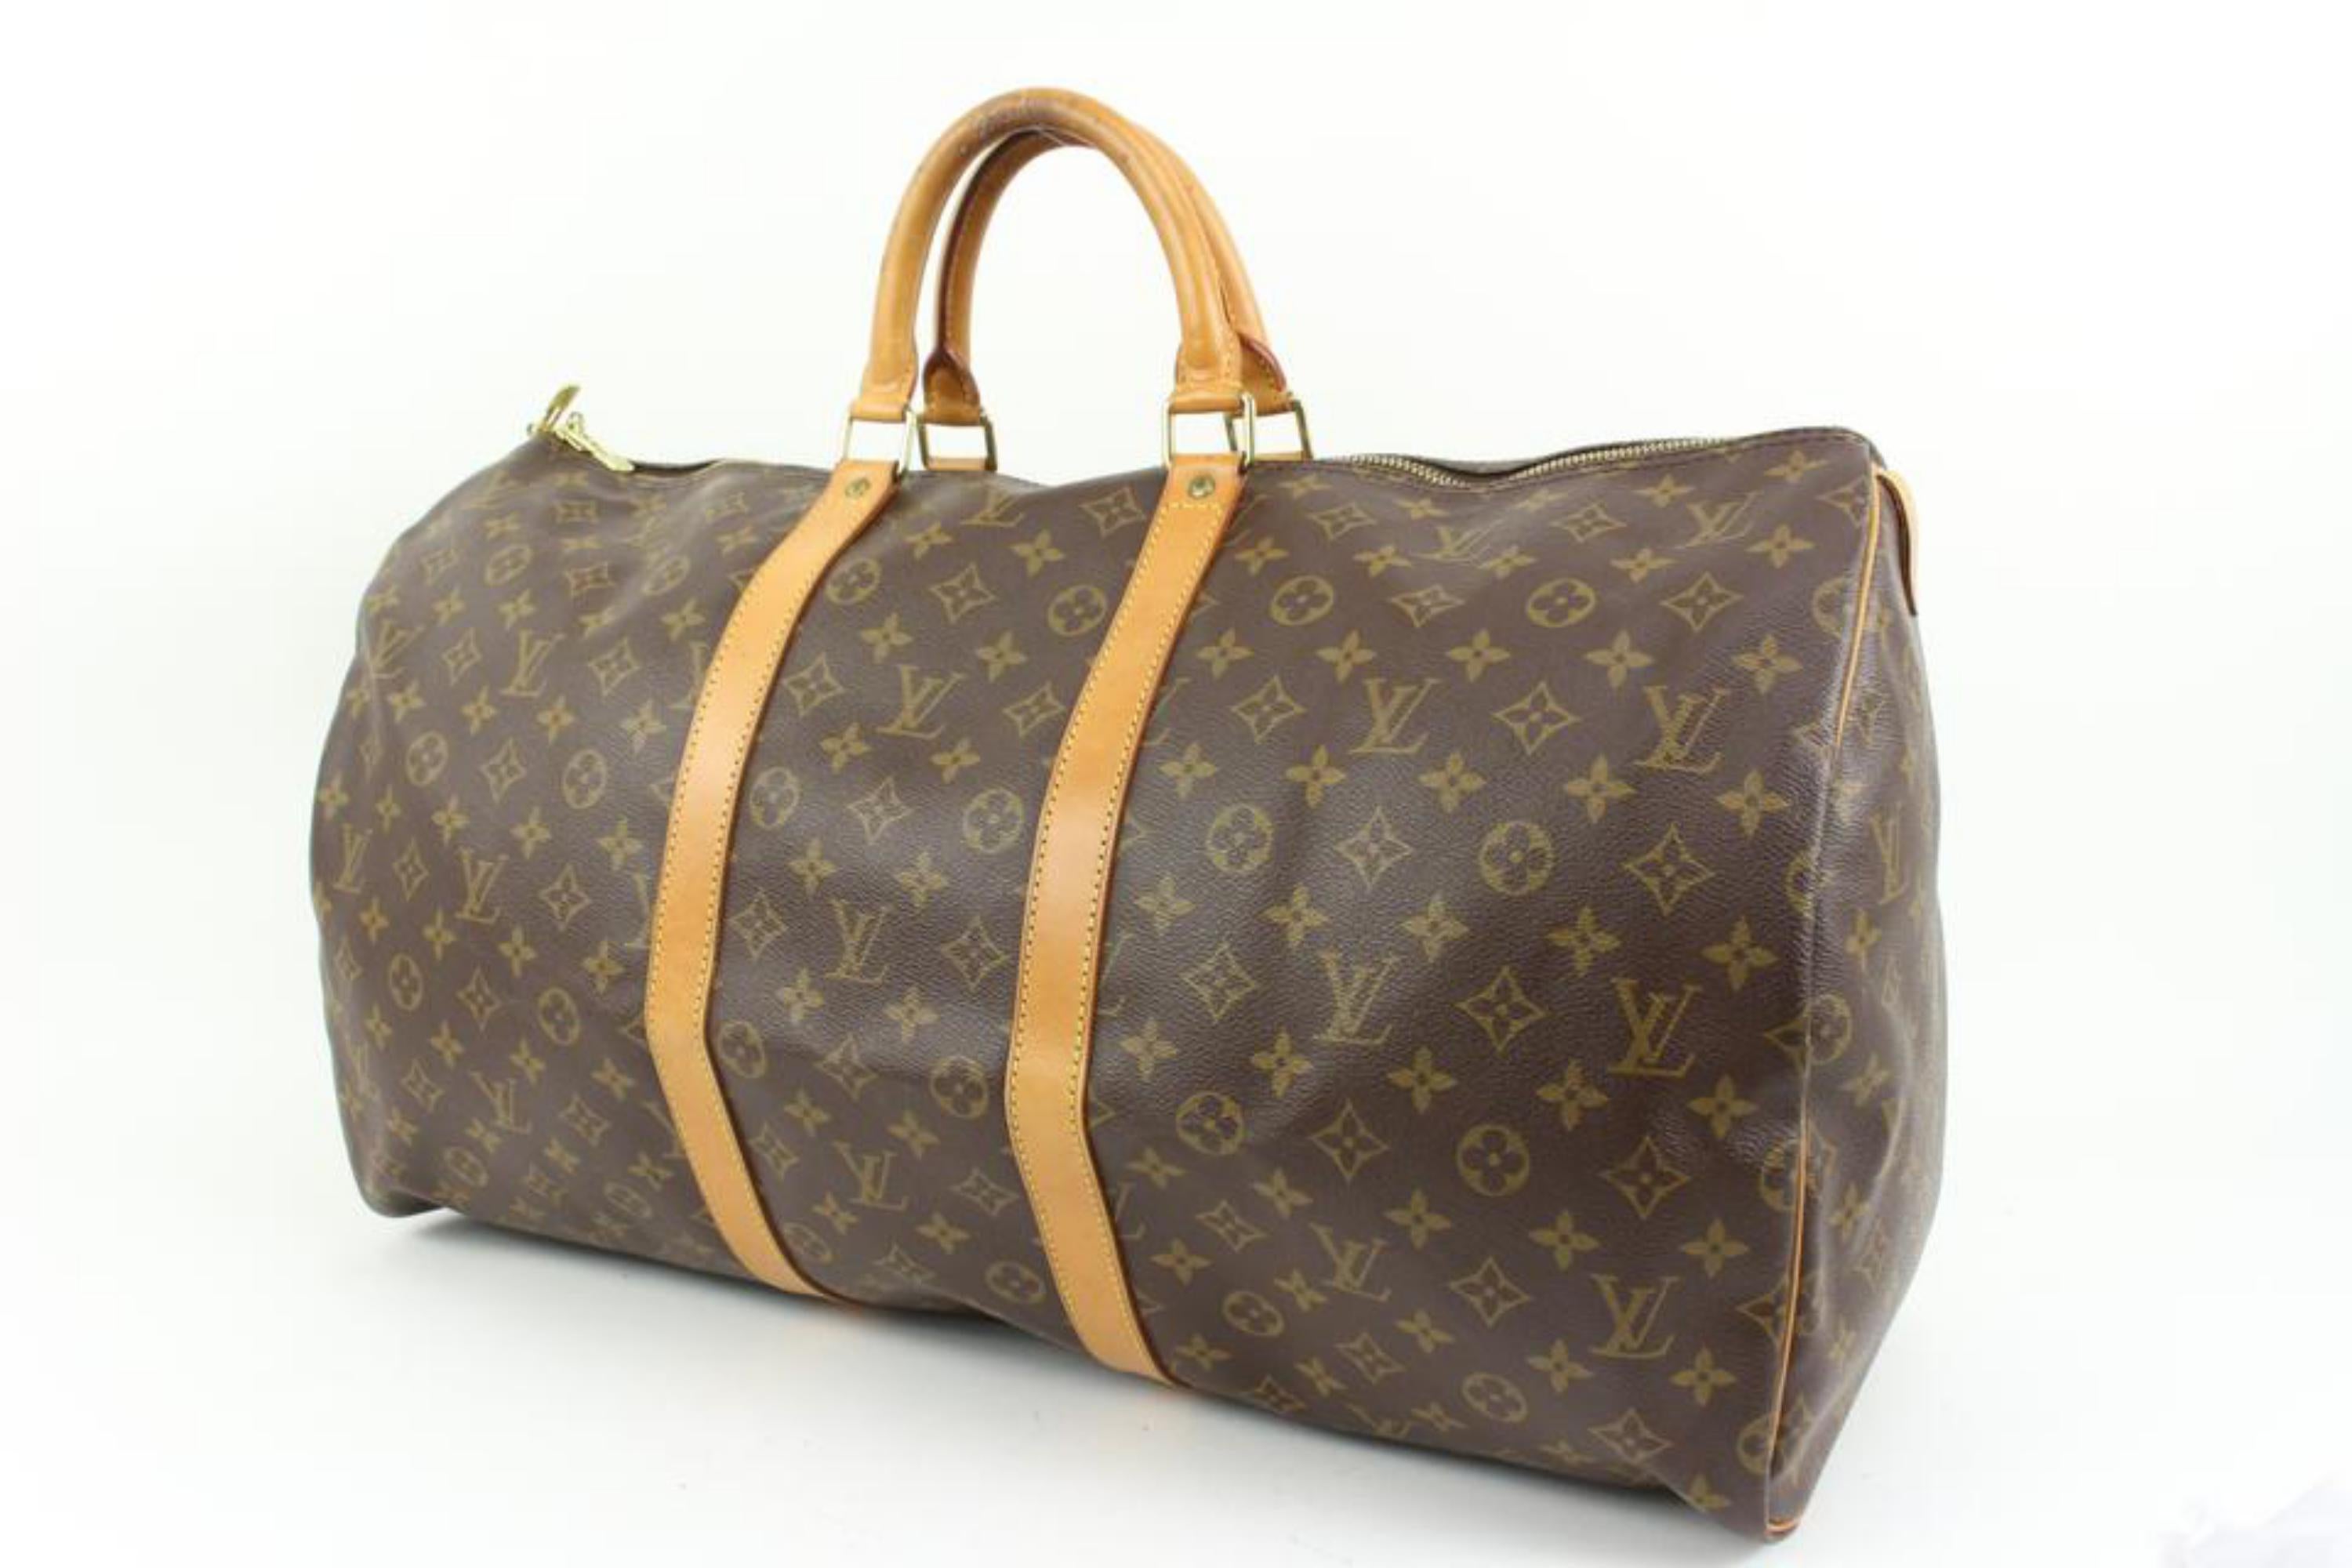 Louis Vuitton Monogram Keepall 55 Boston Duffle Bag 18lz419s
Date Code/Serial Number: SP1914
Made In: France
Measurements: Length:  22